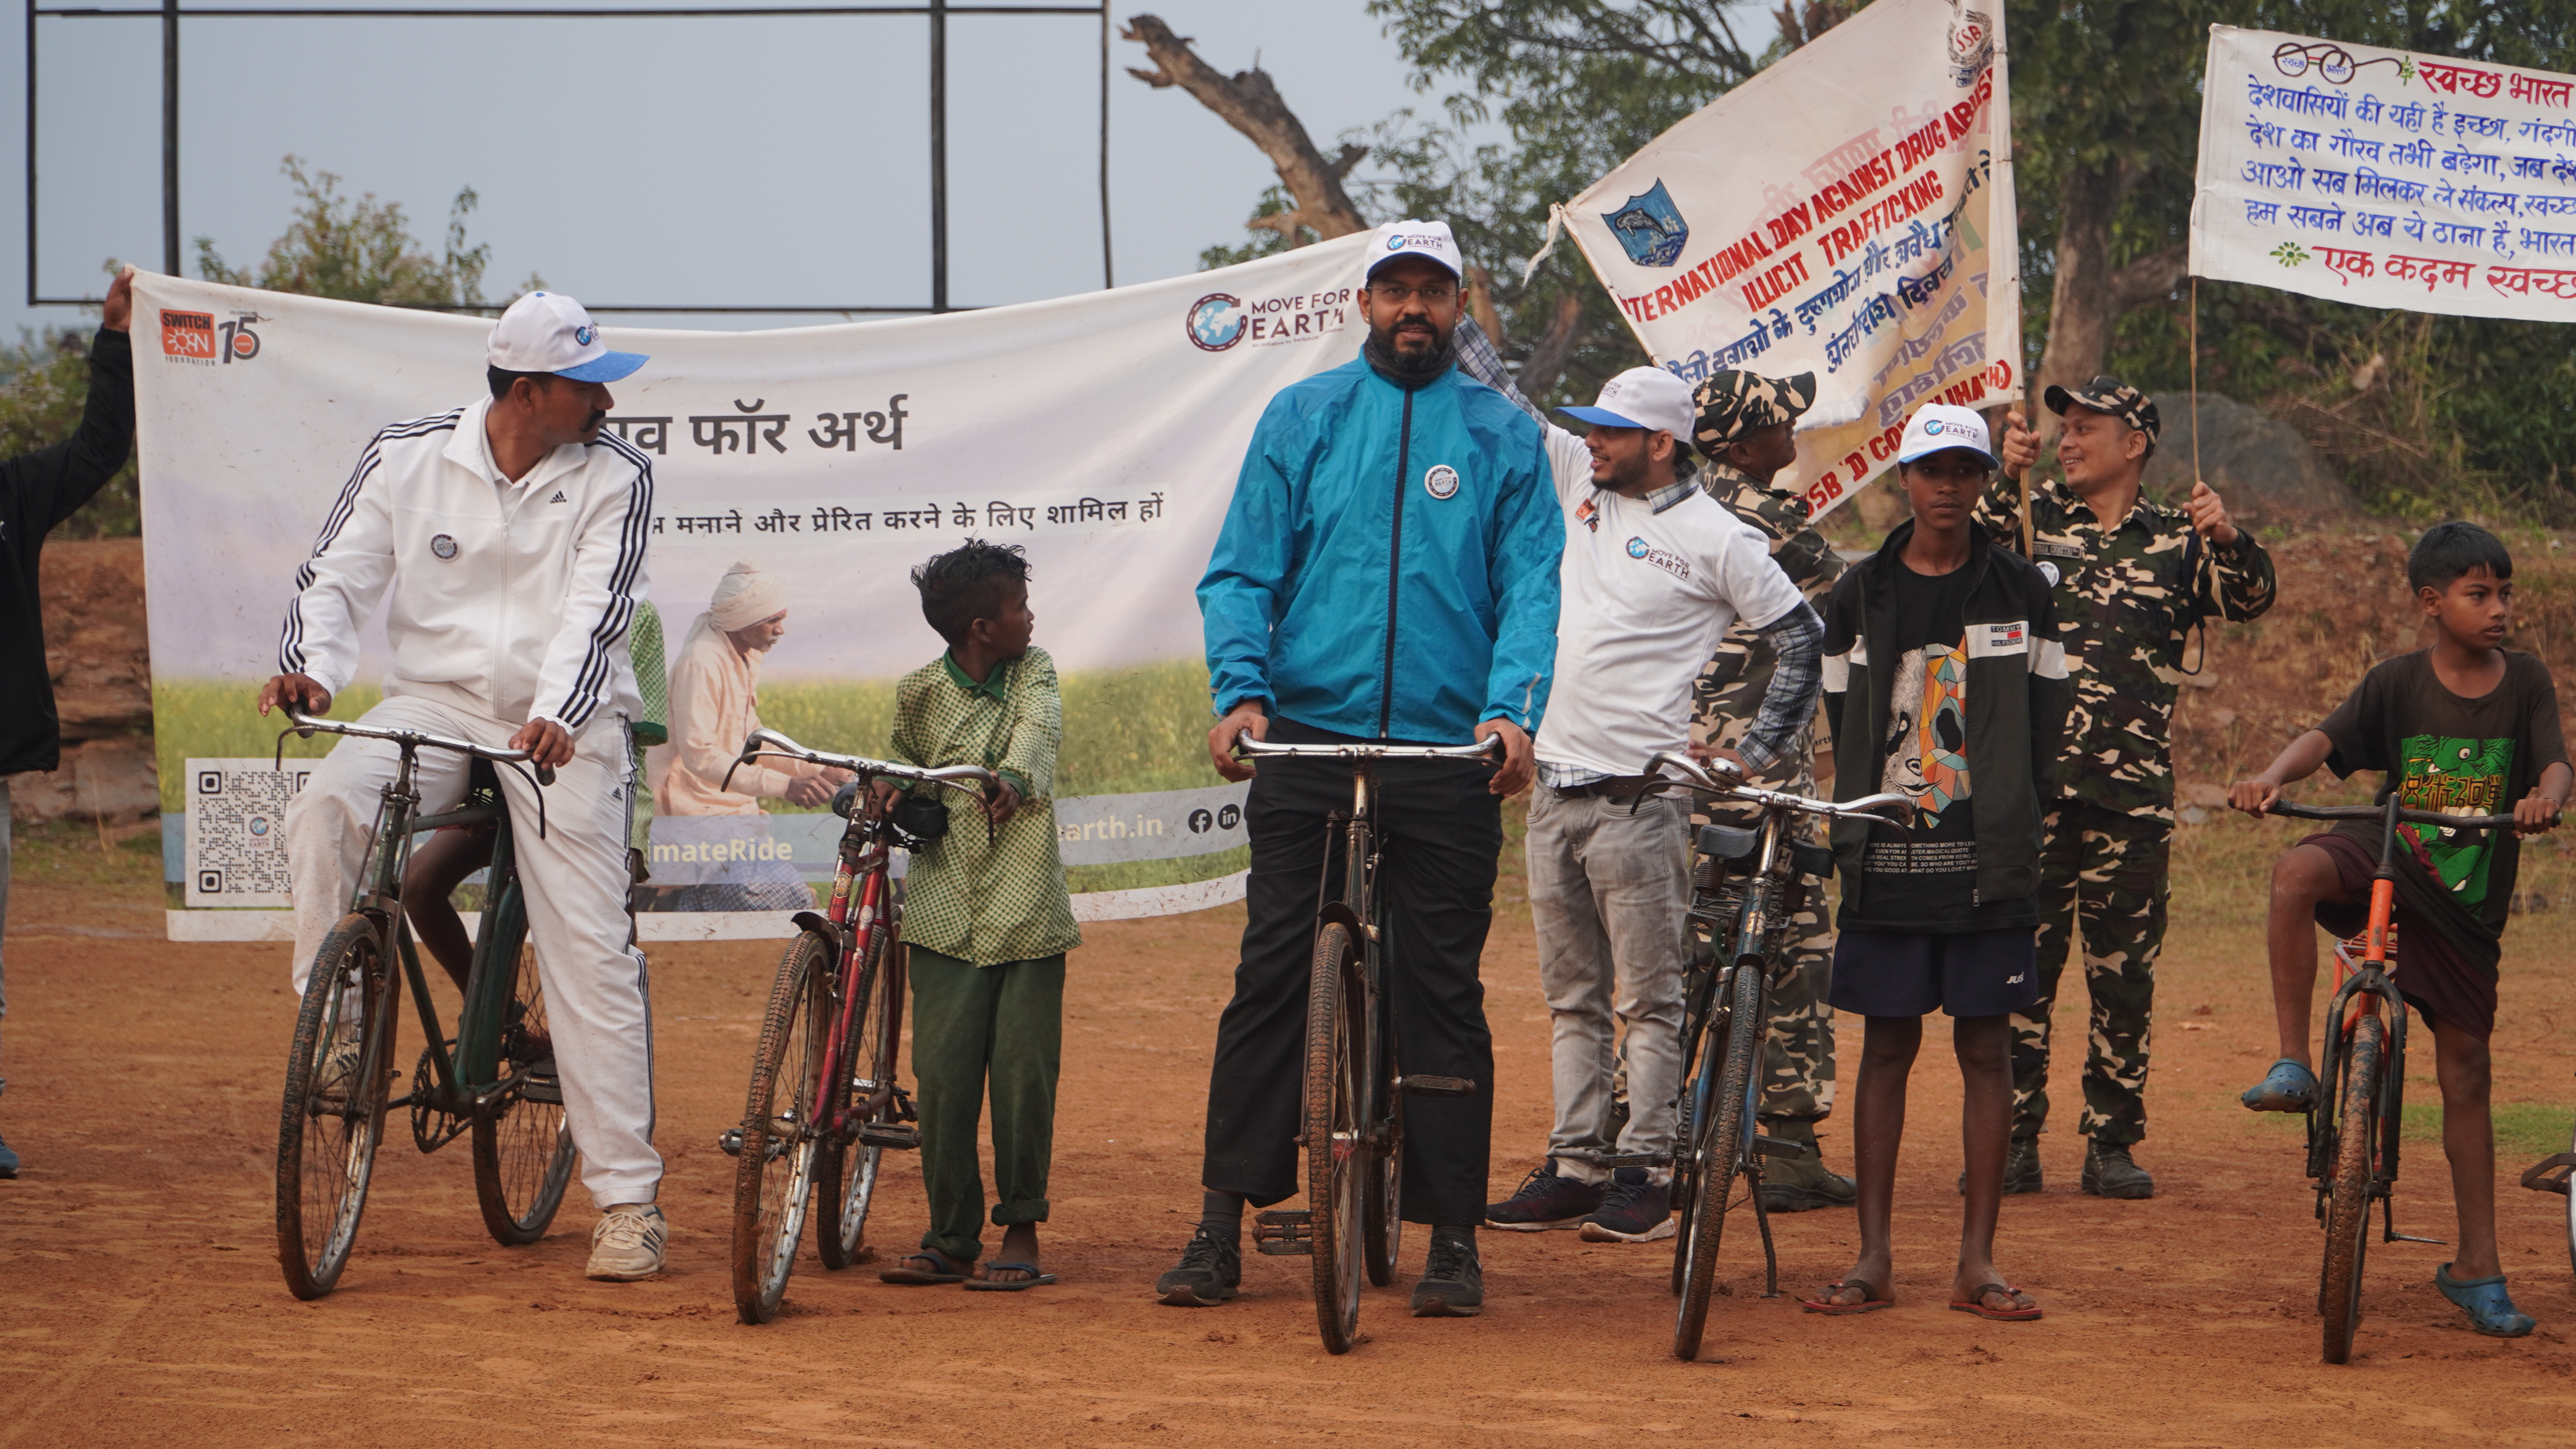 Move for Earth launch to celebrate & inspire Climate Action in Jharkhand